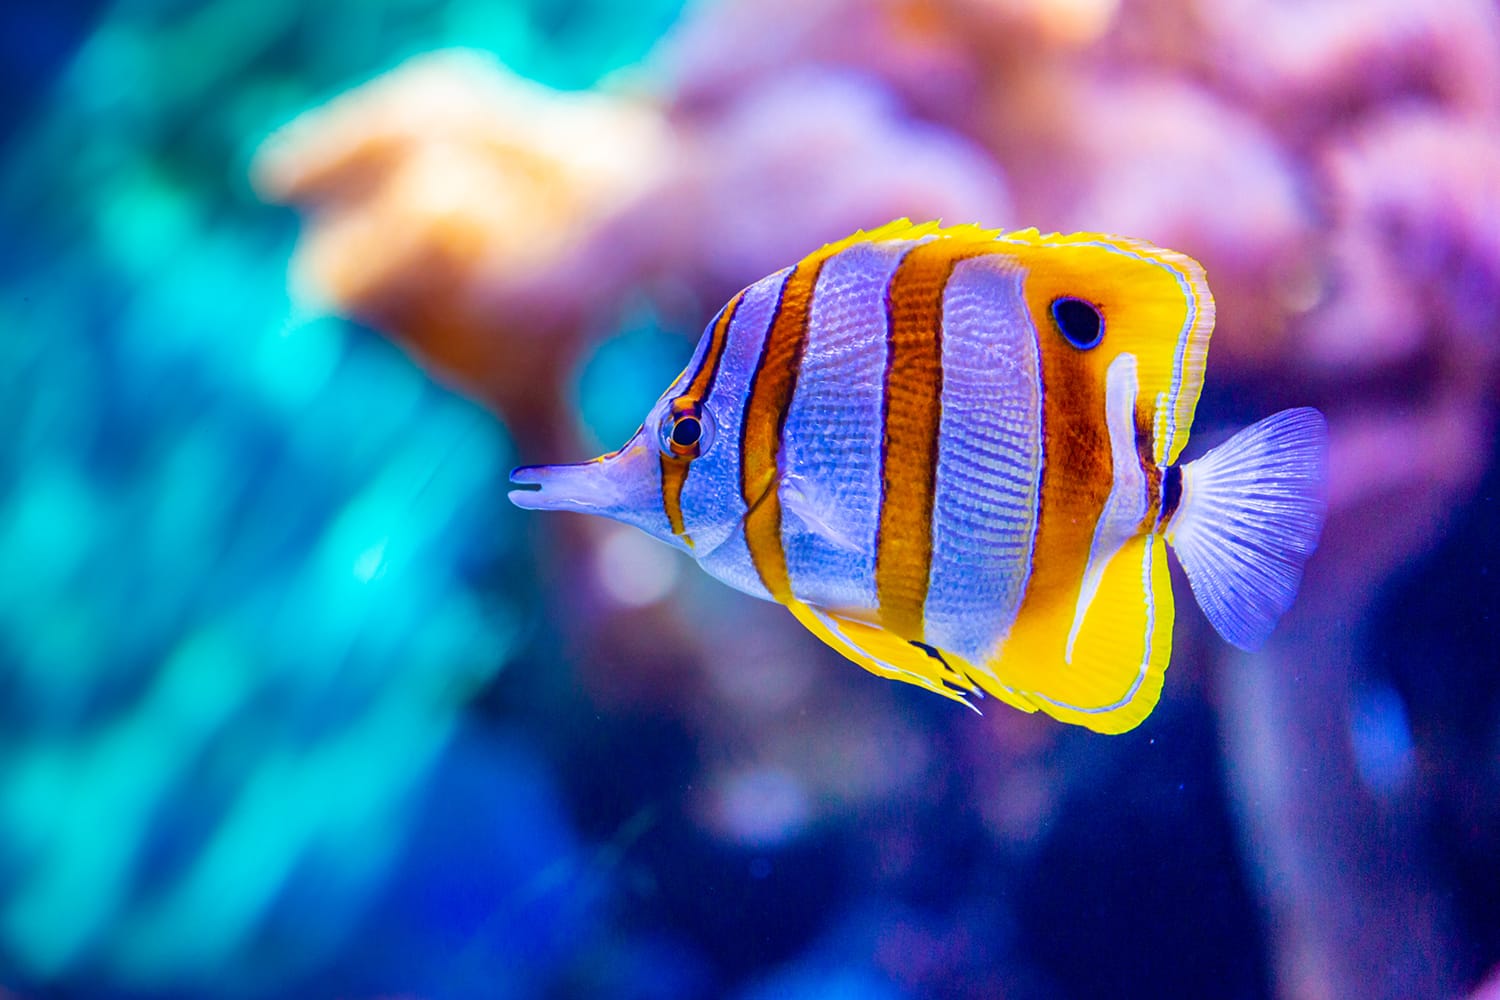 Copperband butterflyfish (Chelmon rostratus), commonly known as beaked coral fish